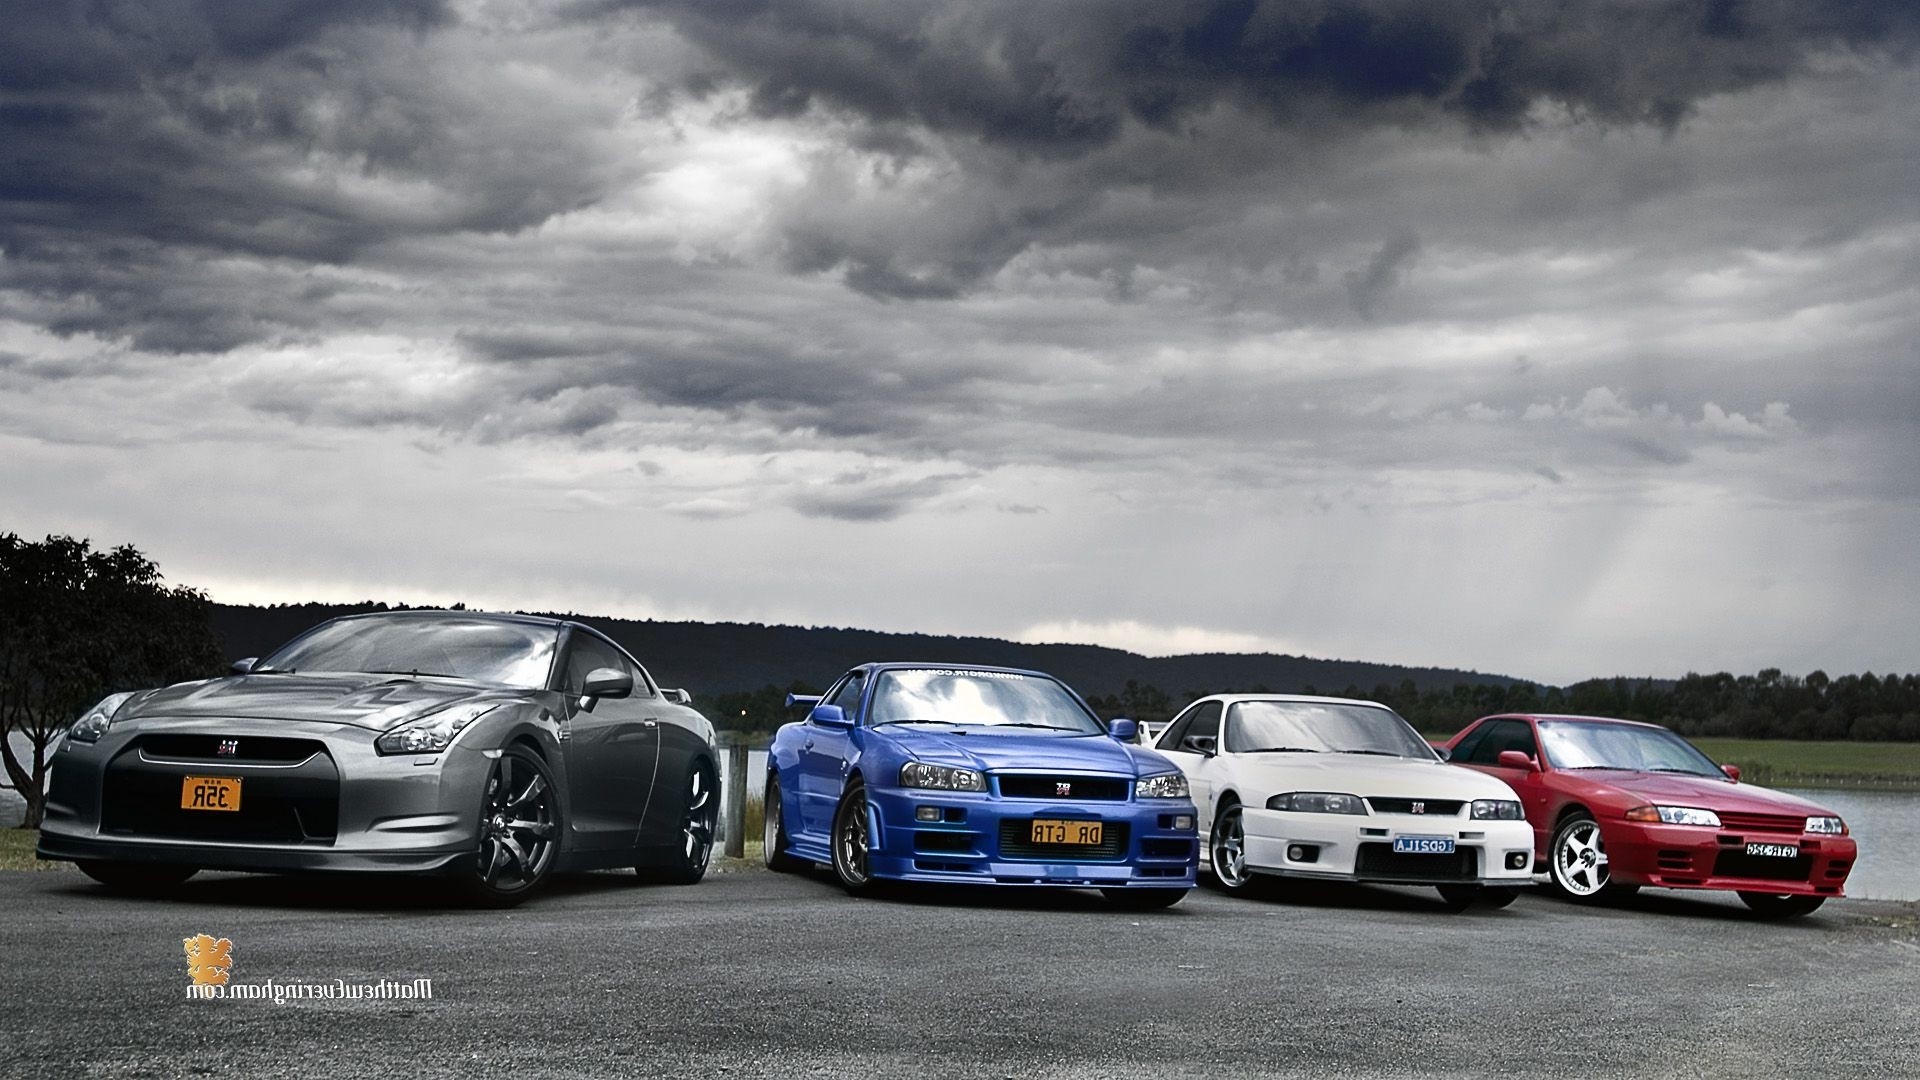 1920x1080 Nissan Skyline GTR R34 Wallpapers (52 Wallpapers) – Adorable Wallpapers